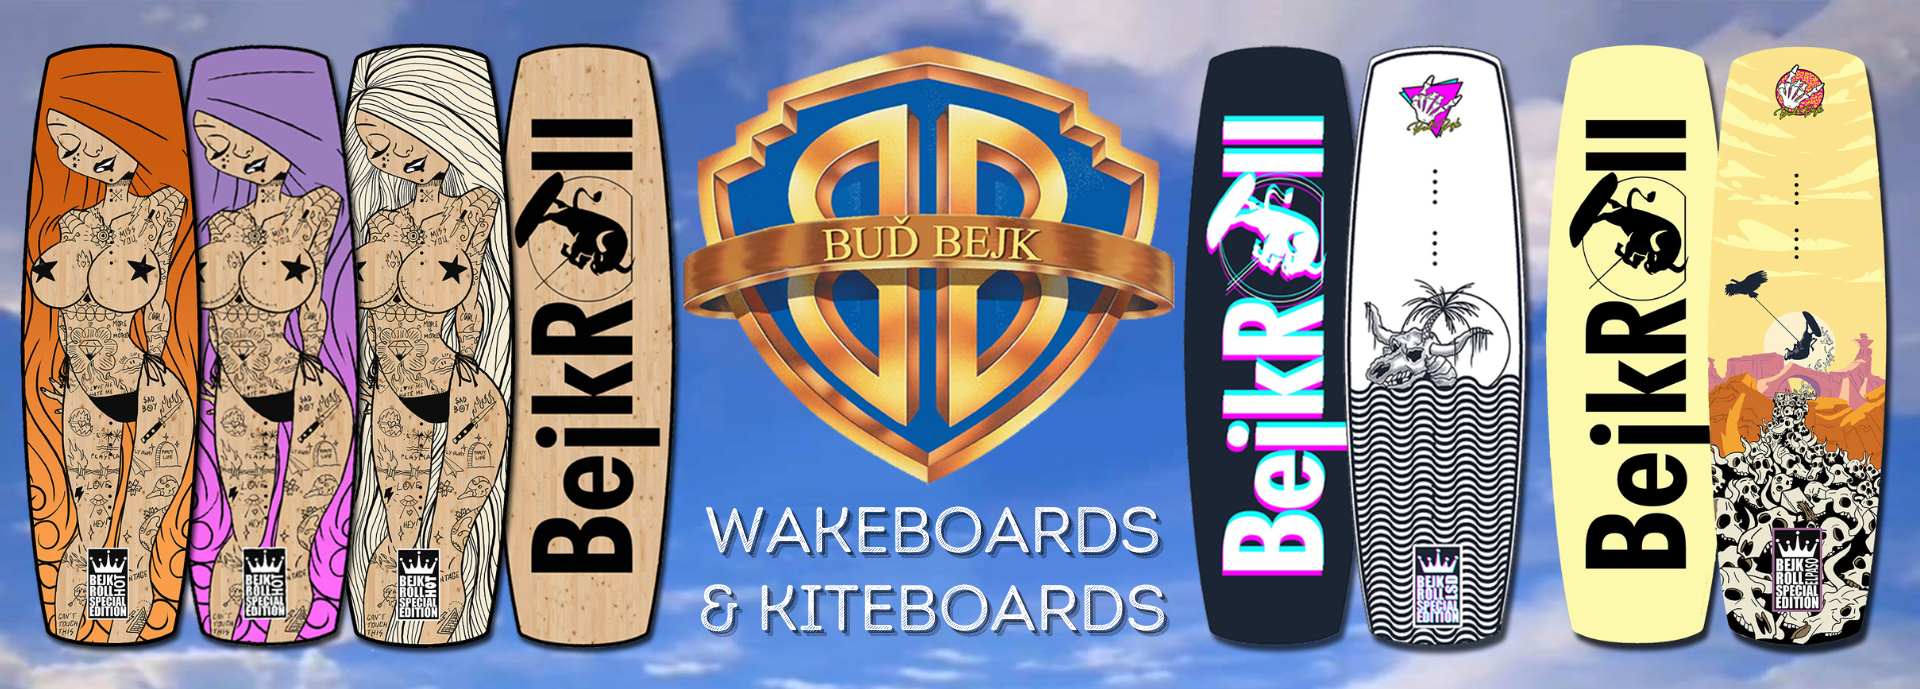 BejkRoll Wakeboards and Kiteboards